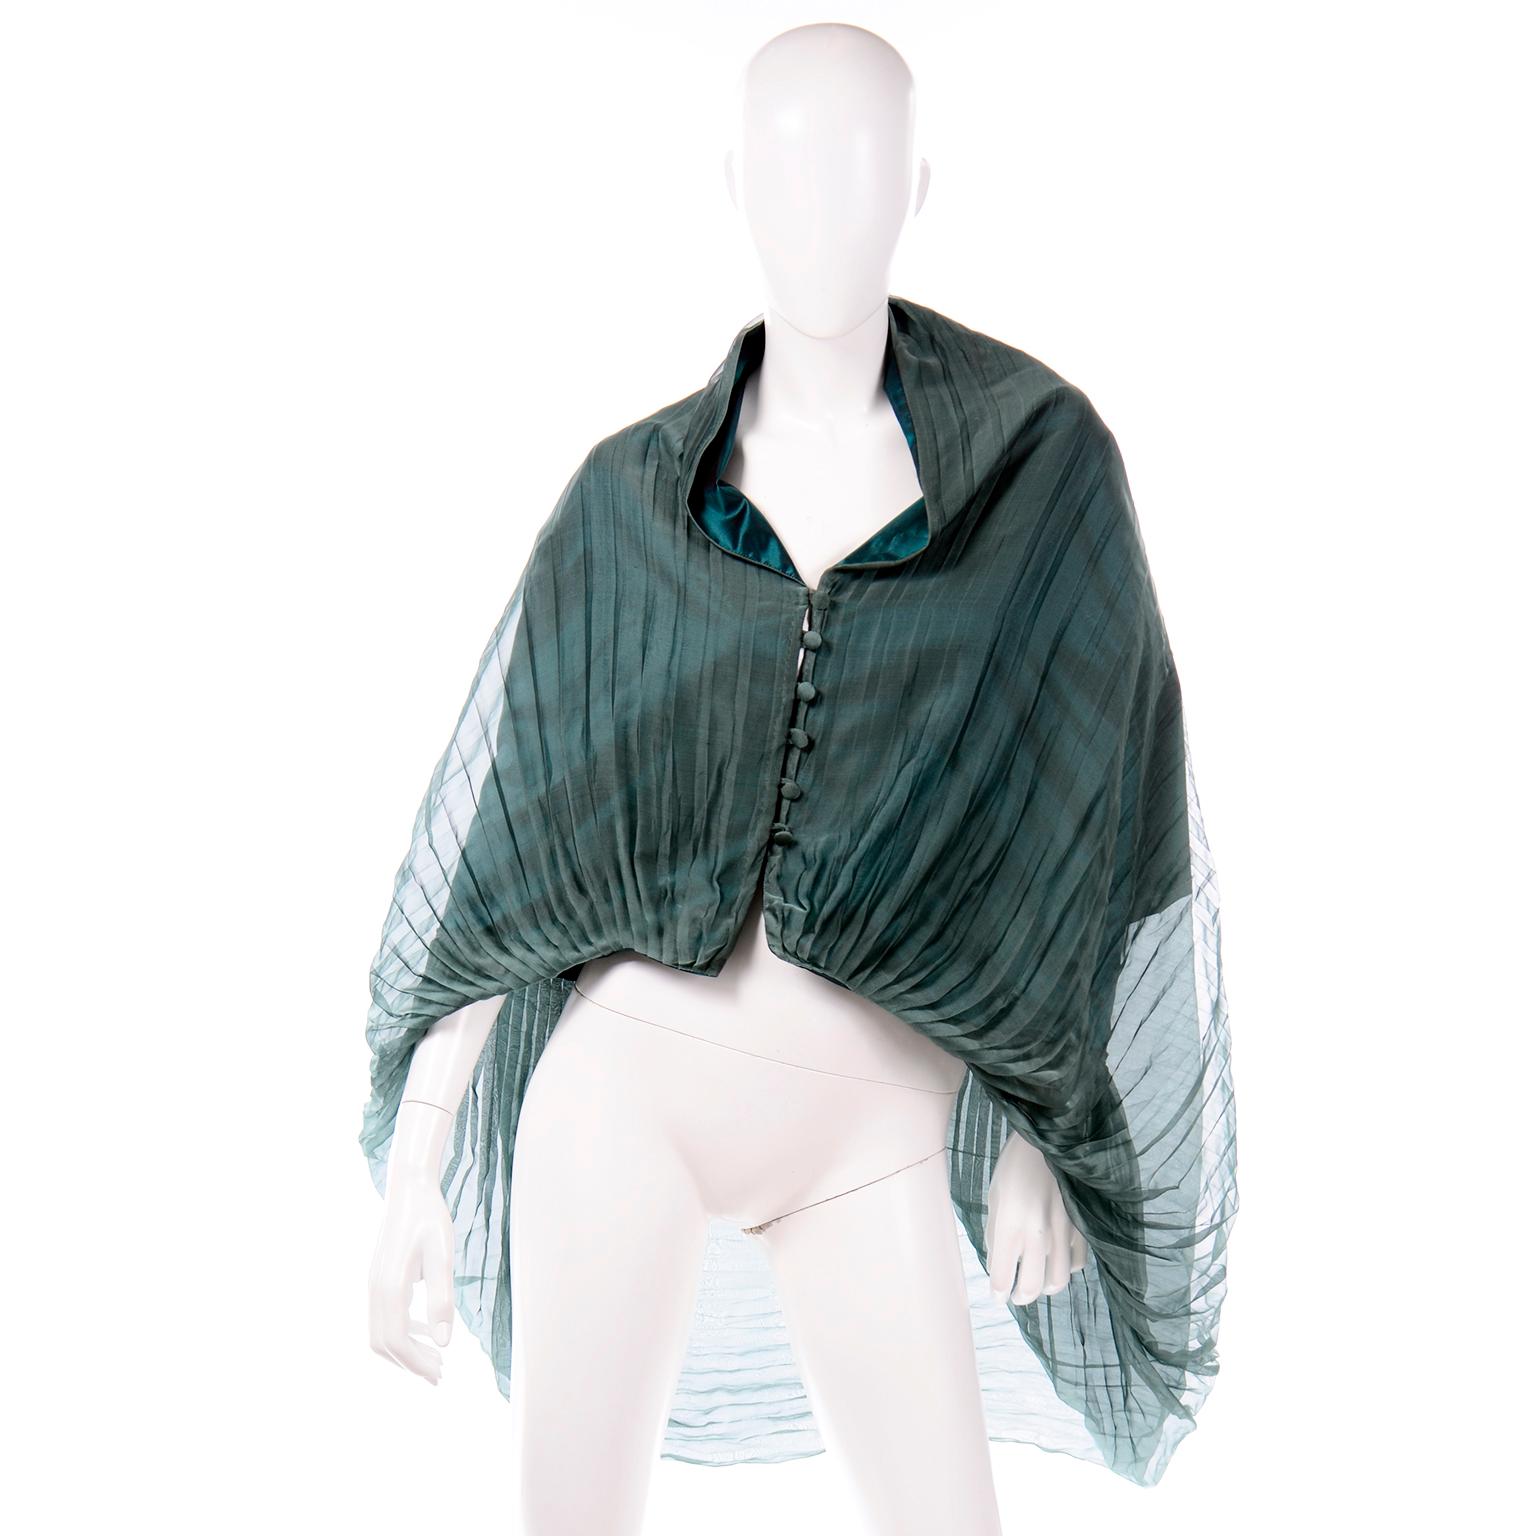 This is a stunning vintage green evening cape style pleated top from Maurizio Galante for Circolare. This incredible top has green silk taffeta under the pleated sheer organza overlay.  The top can be worn in a variety of ways and has a button in